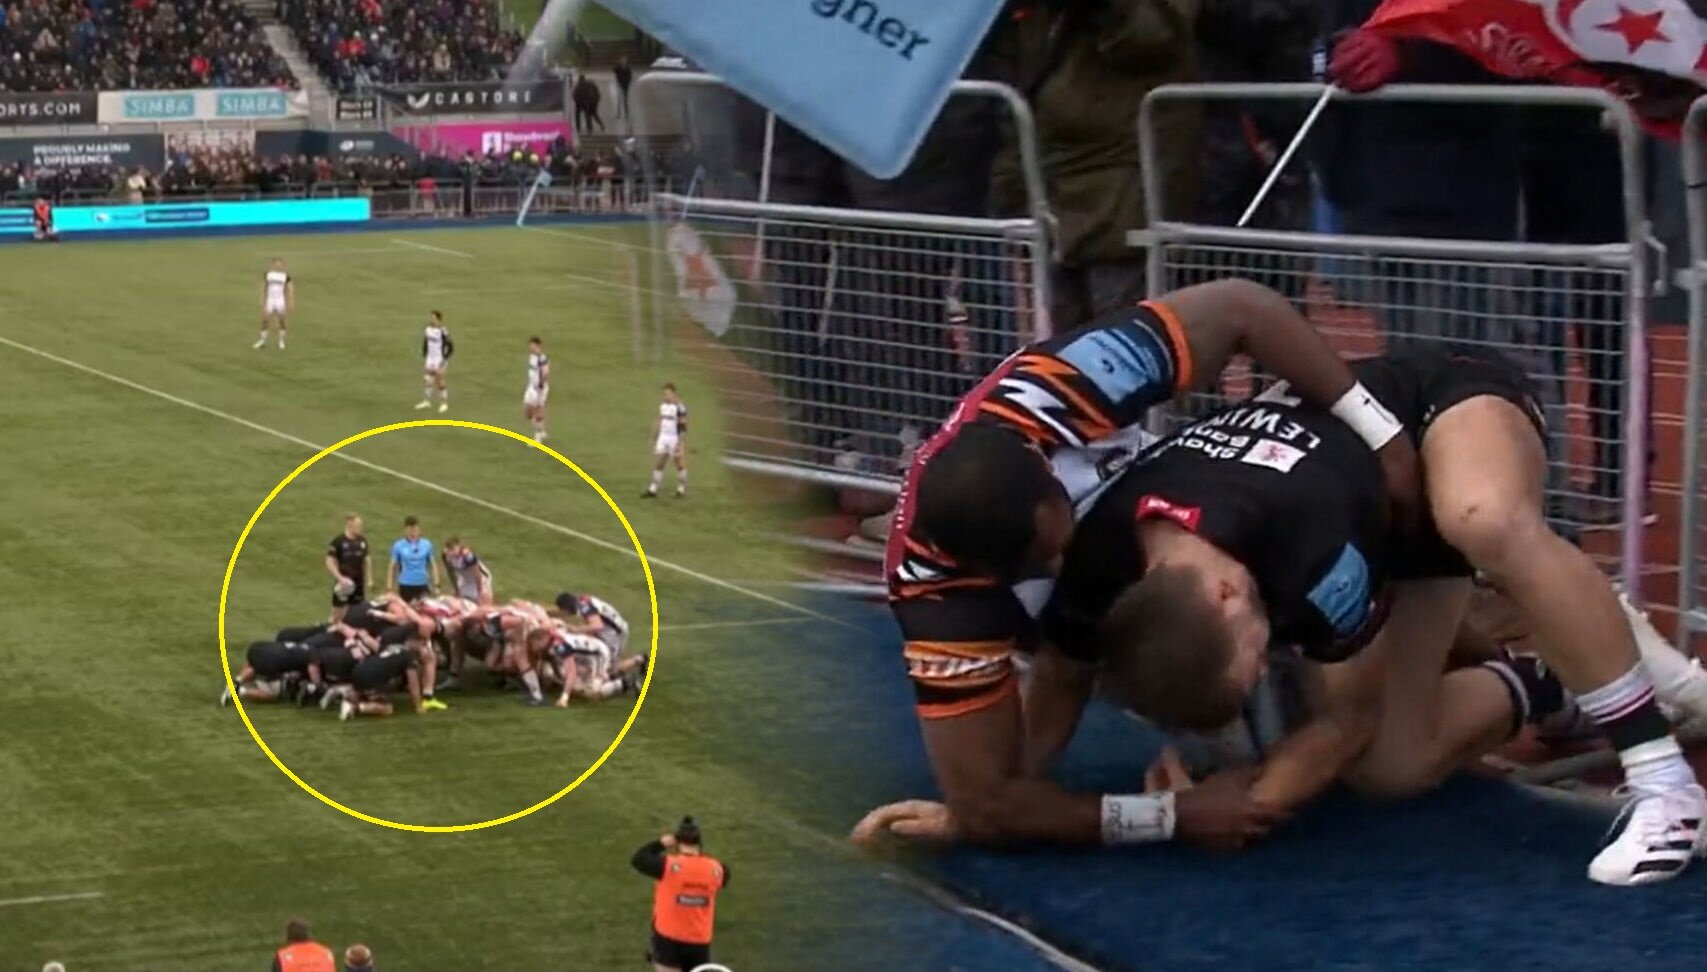 Sarries catch Tiger napping with brilliant set-piece move